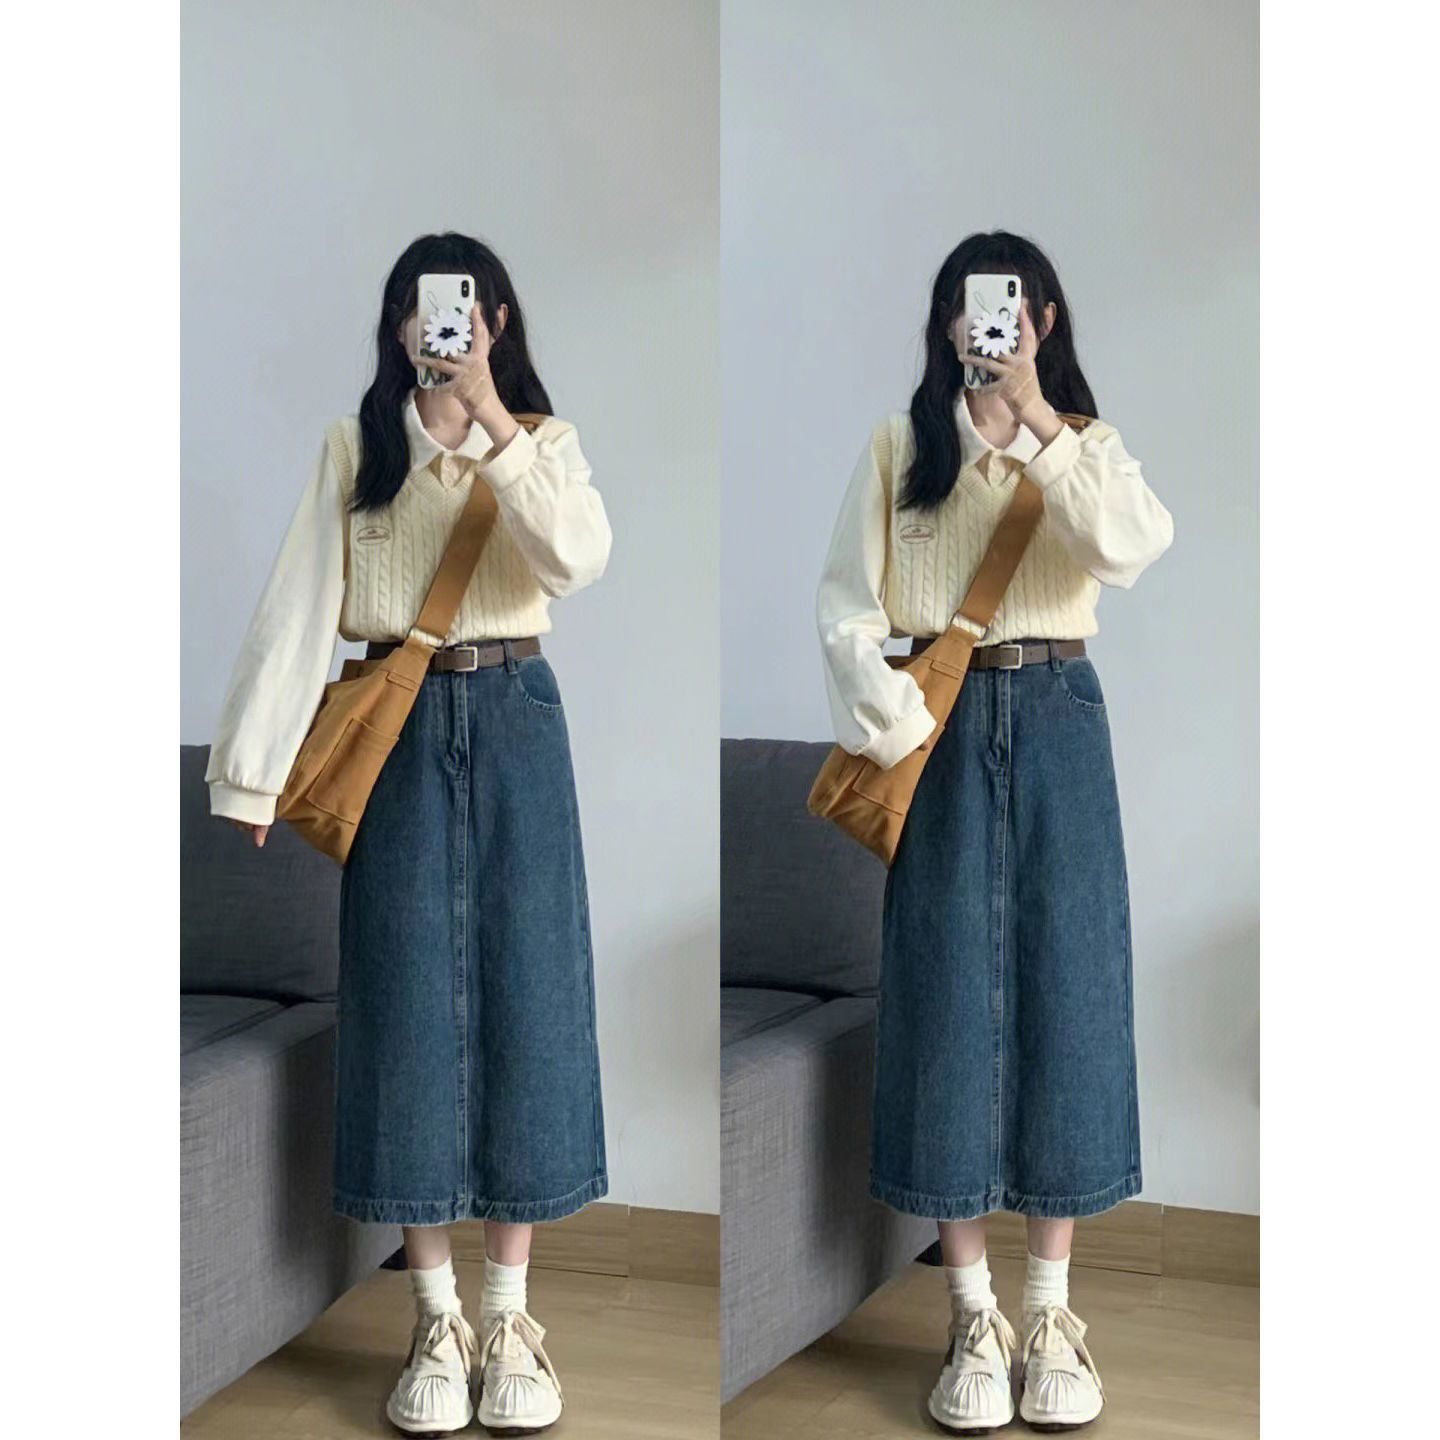 Two-piece suit spring and autumn new small knitted sweater vest female vest layered with POLO shirt with a complete set